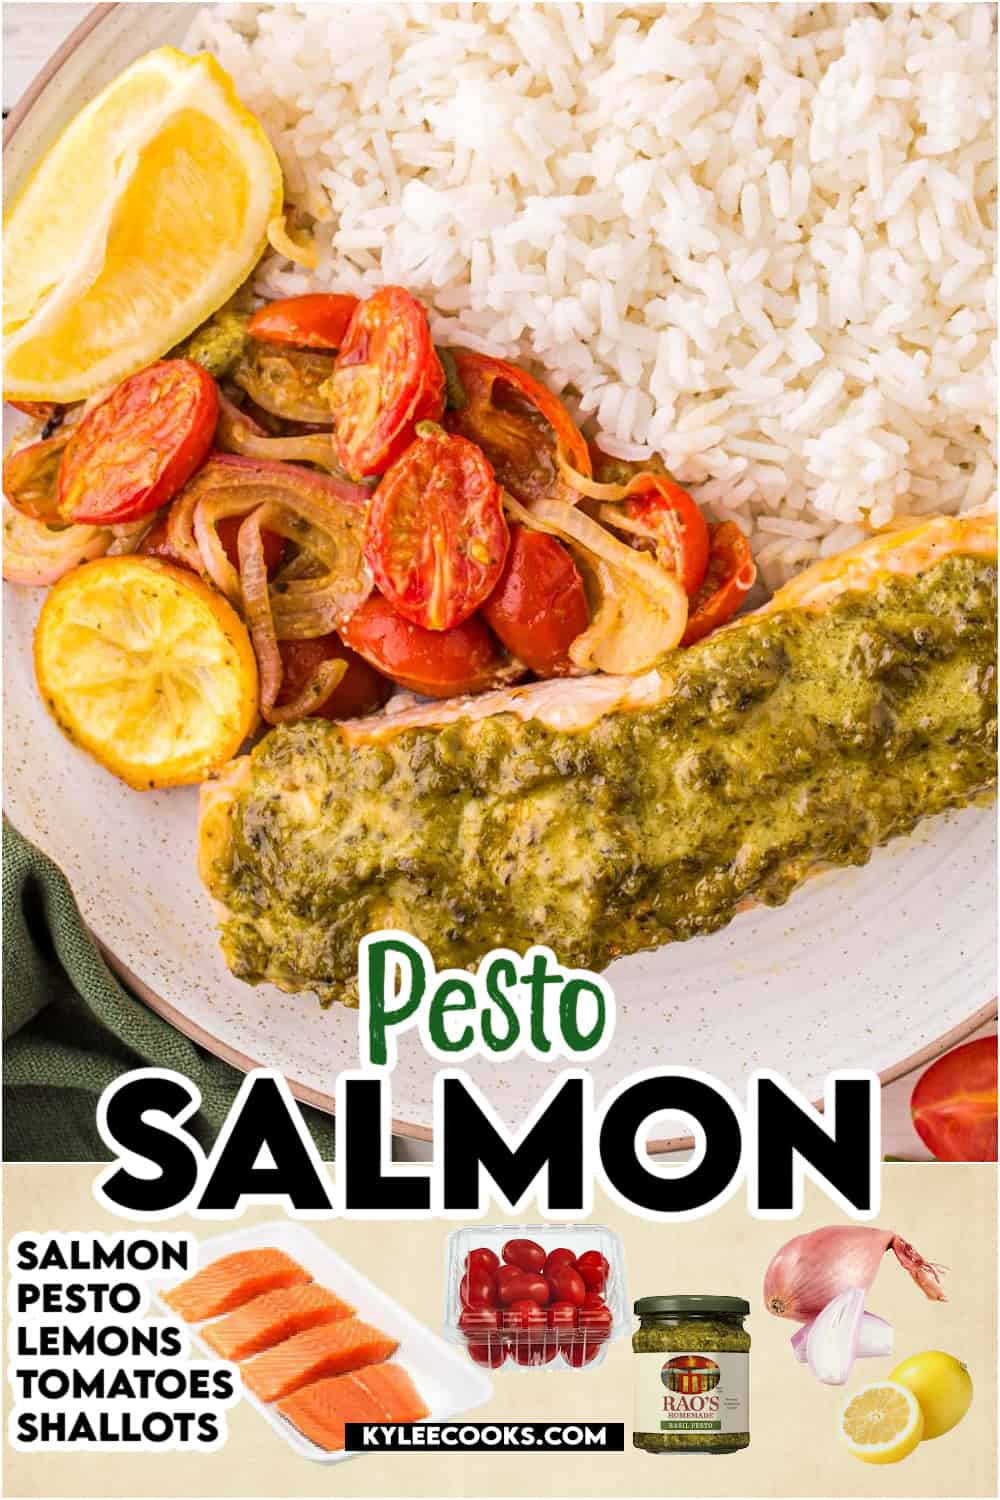 pesto salmon on a plate with rice, with recipe and and ingredients overlaid in text.